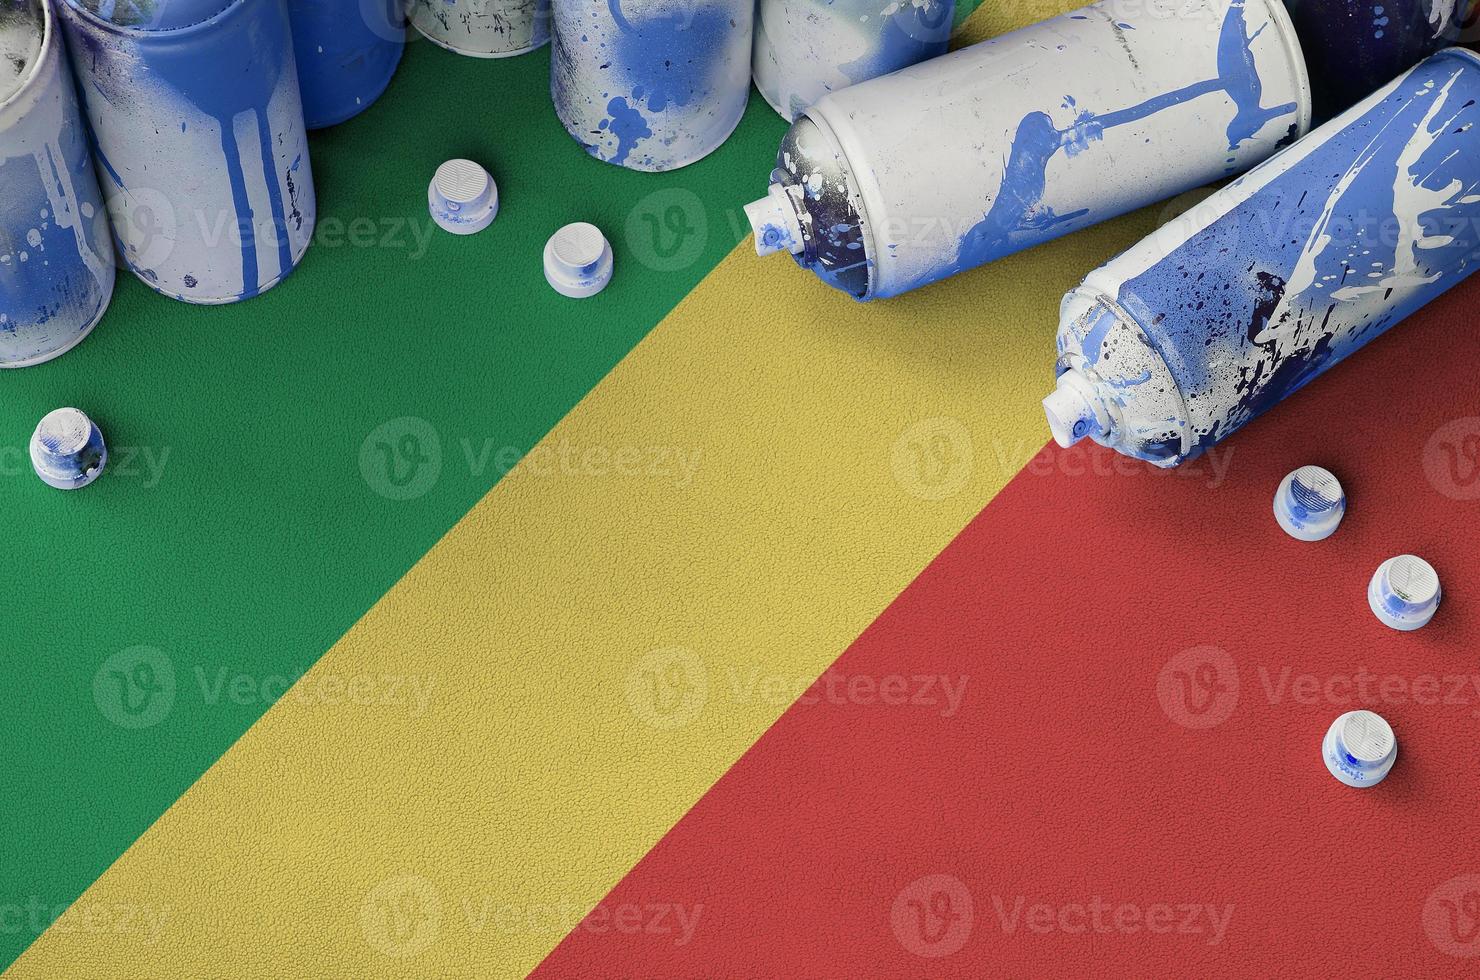 Congo flag and few used aerosol spray cans for graffiti painting. Street art culture concept photo